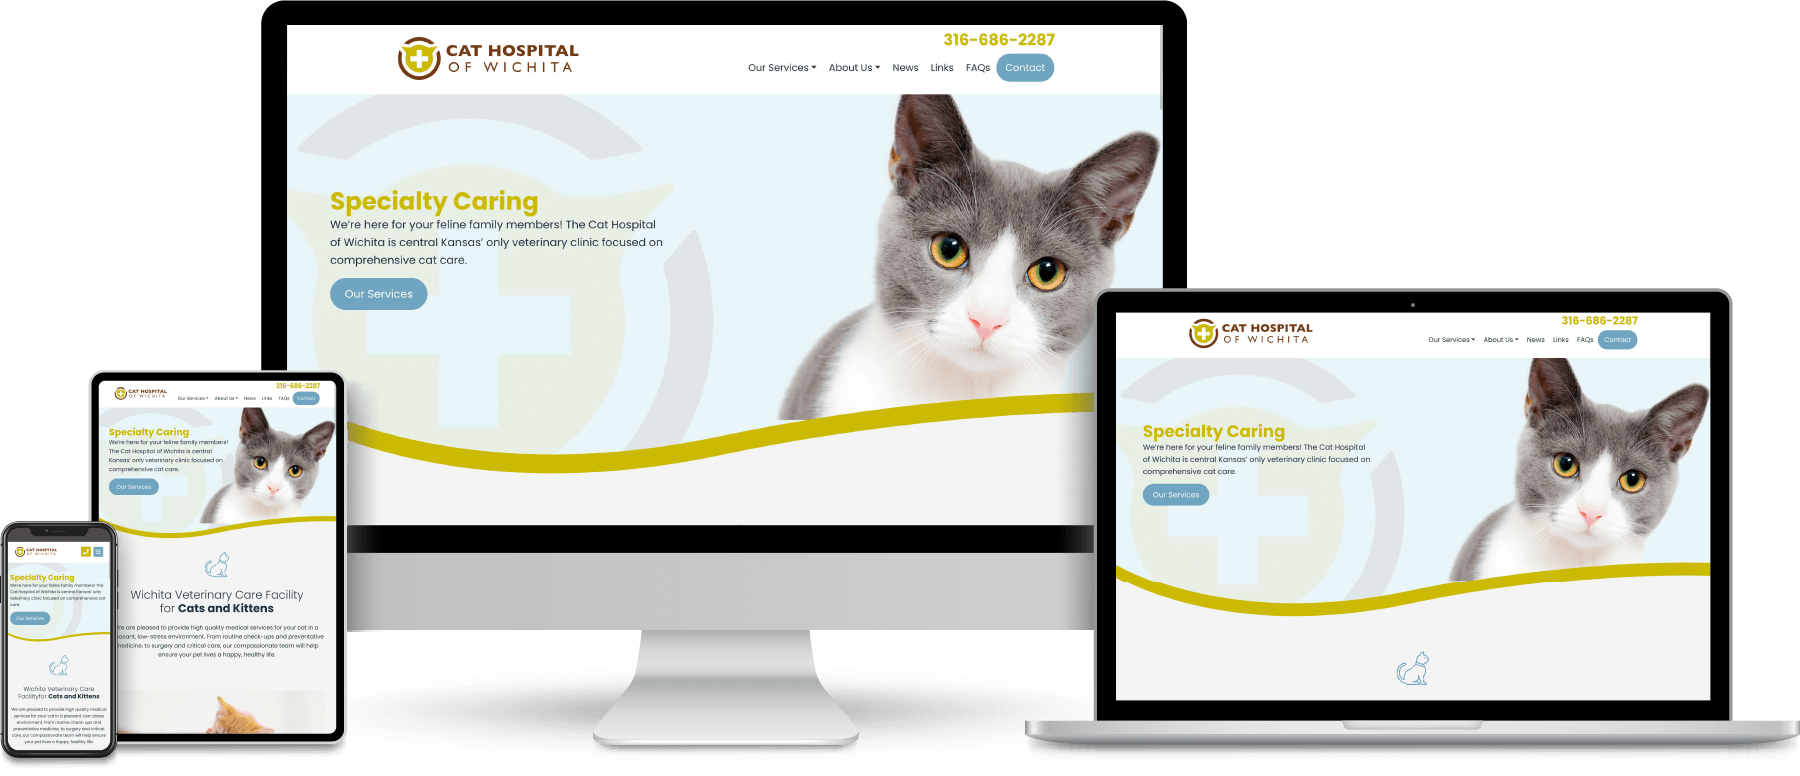 Cat Hospital of Wichita website shown on desktop, laptop, tablet and mobile devices.